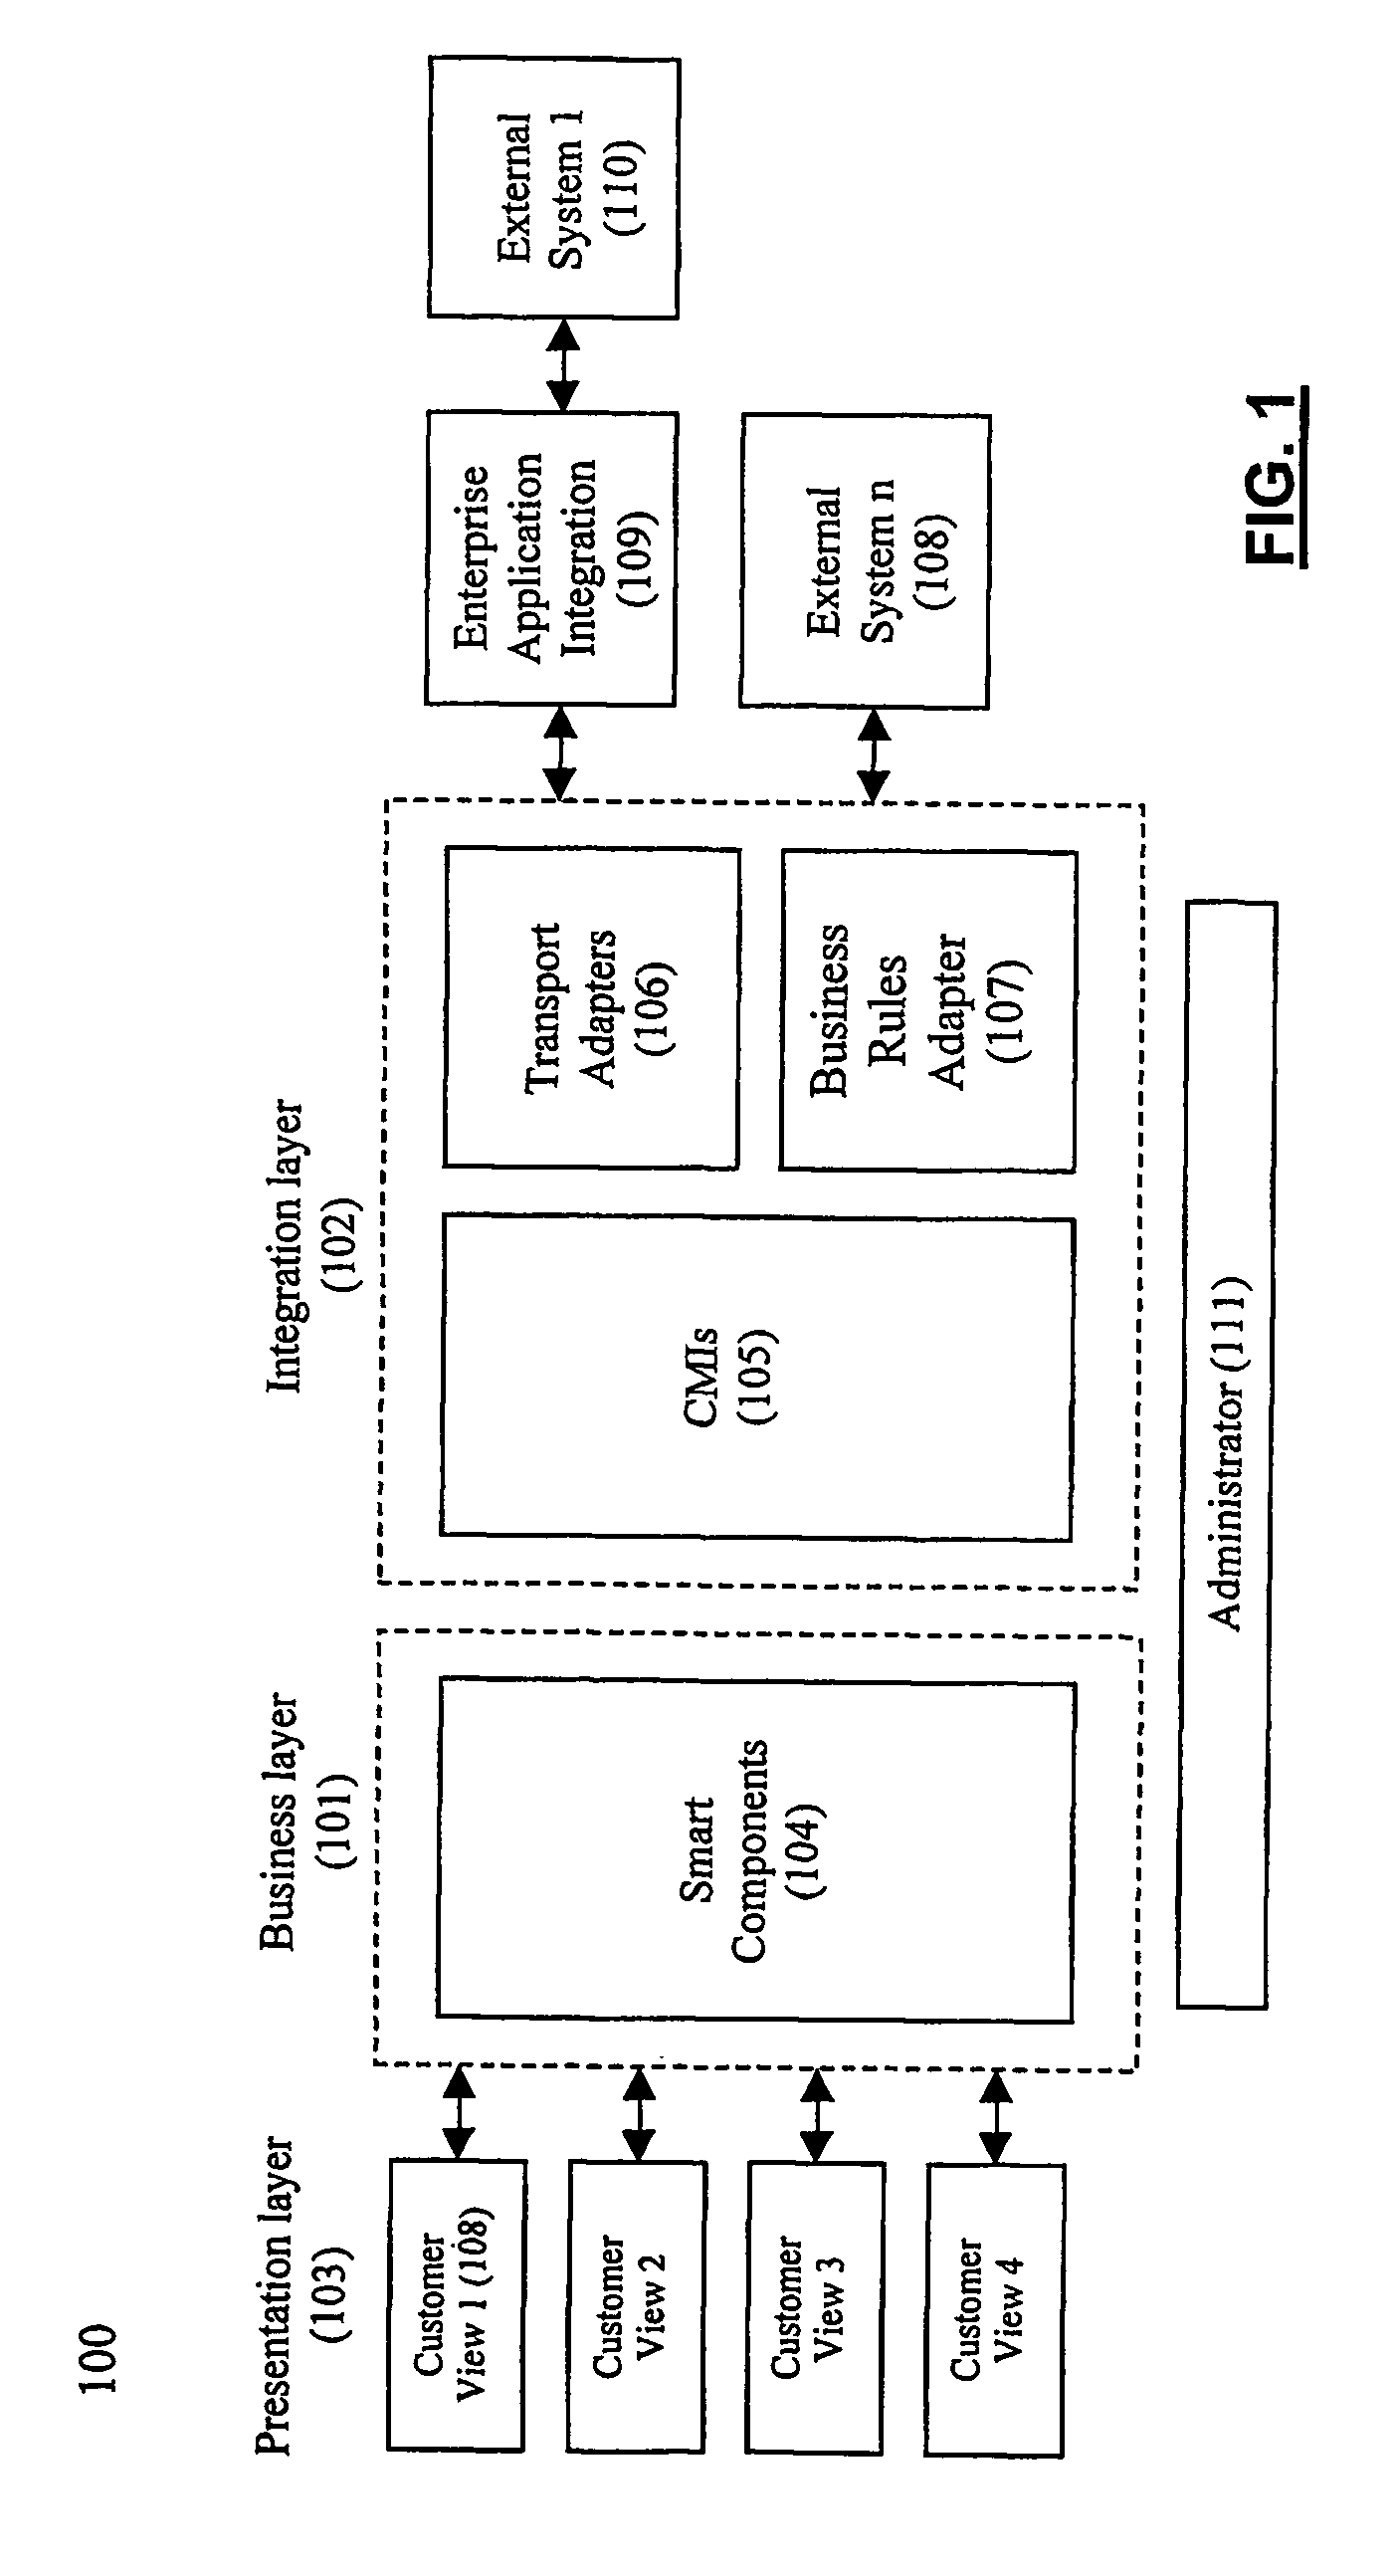 System and method for establishing electronic business systems for supporting communications services commerce